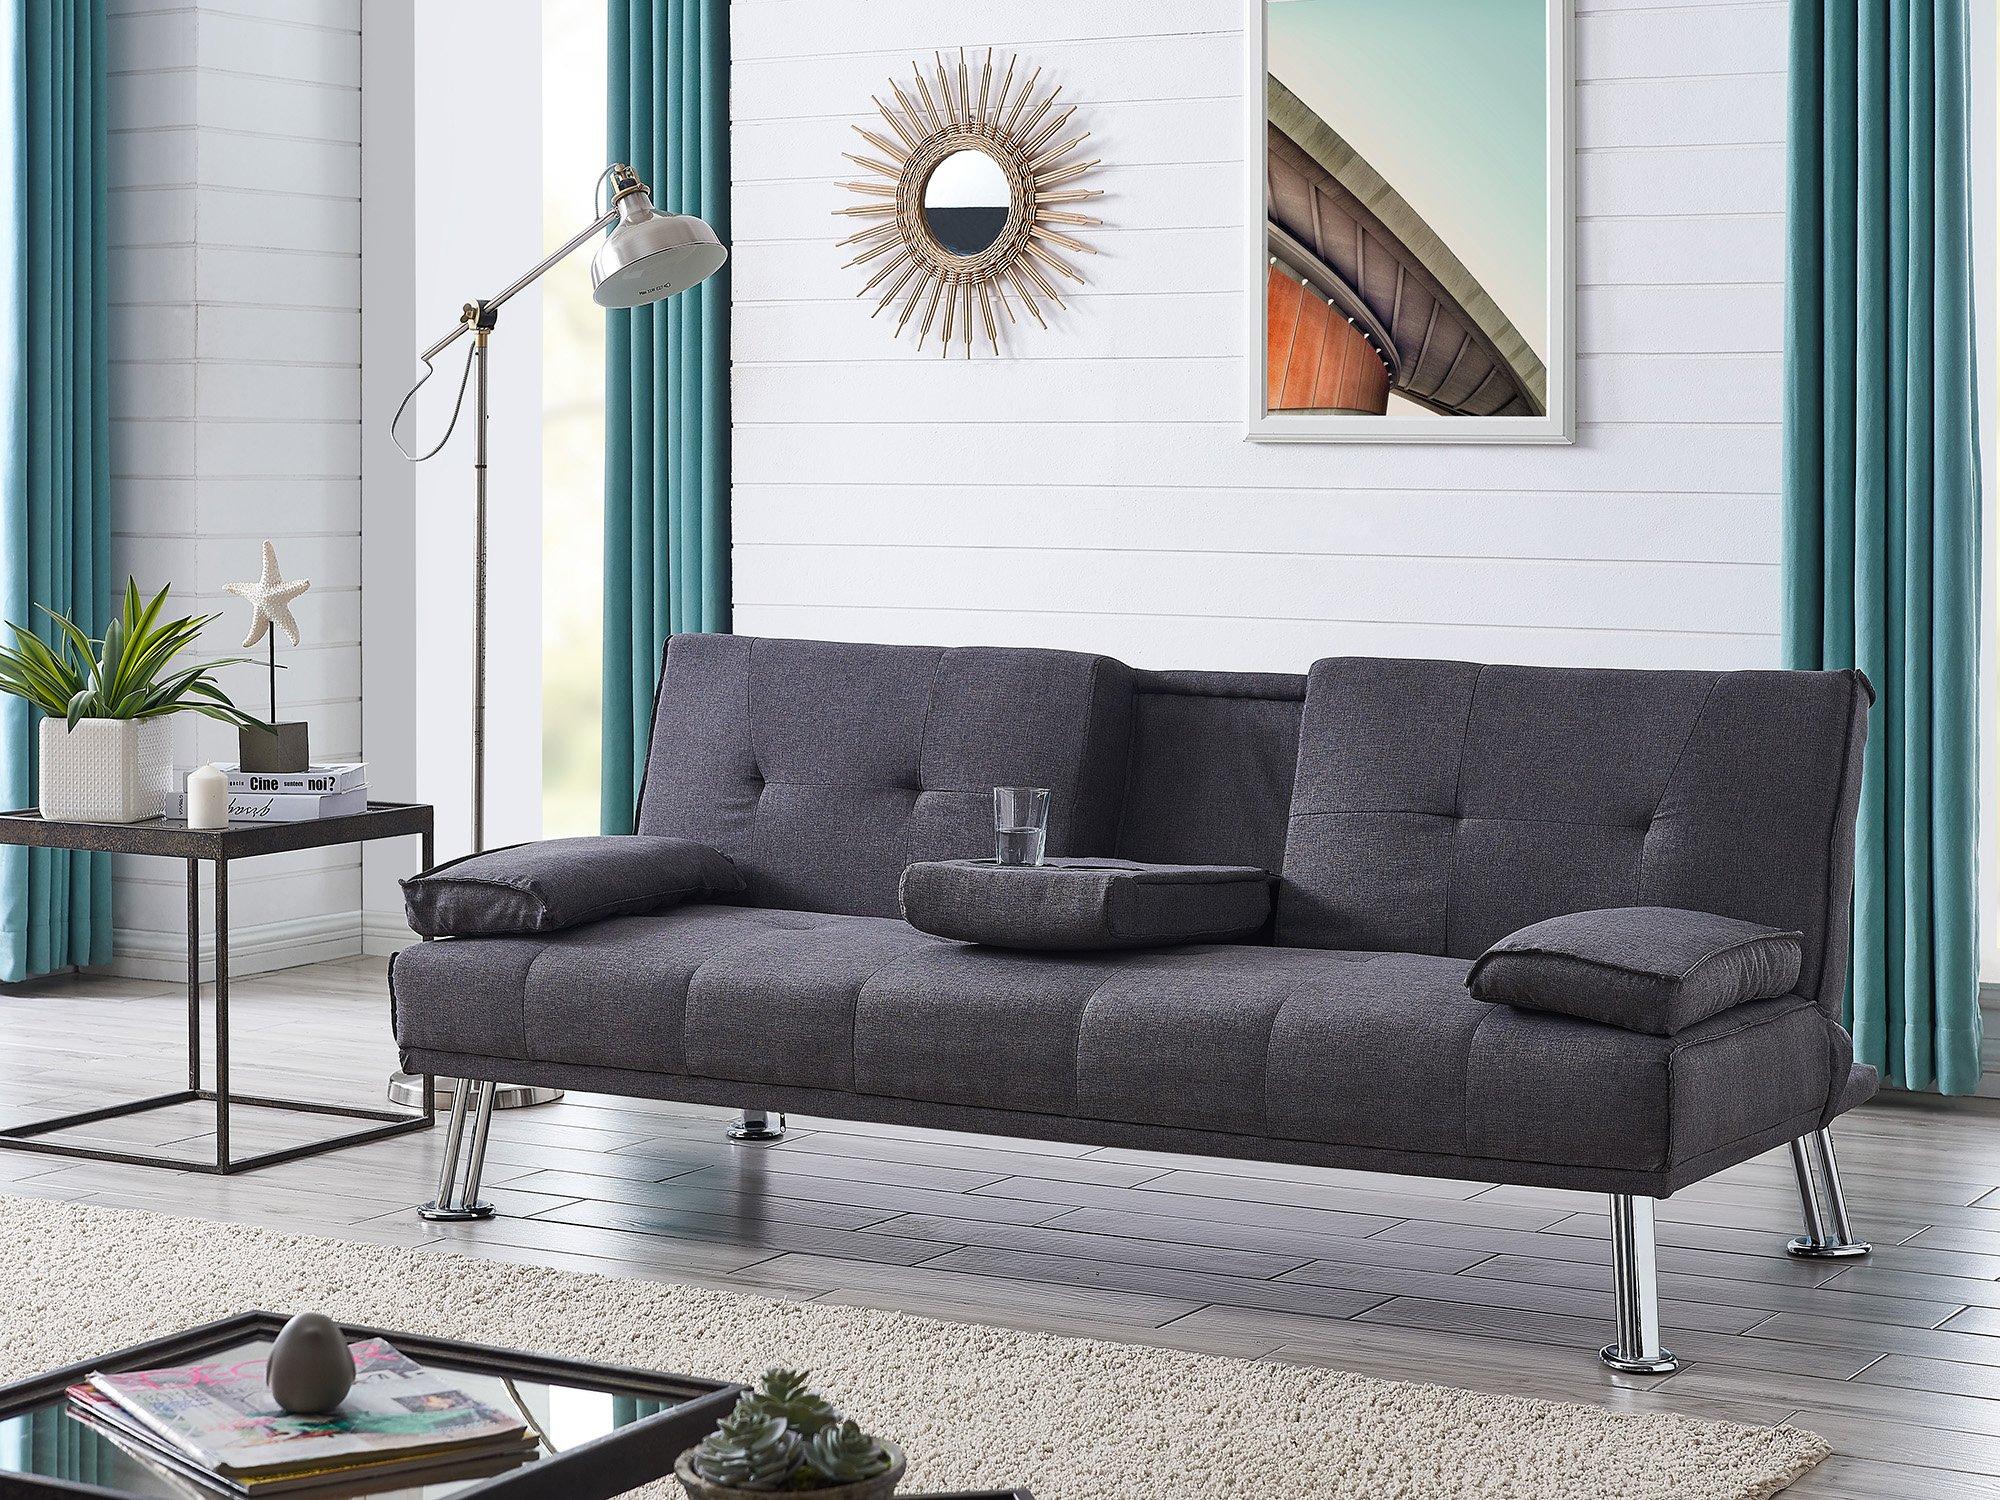 Indiana Fabric Sofa Bed With Pulldown Cupholder and Chrome Legs